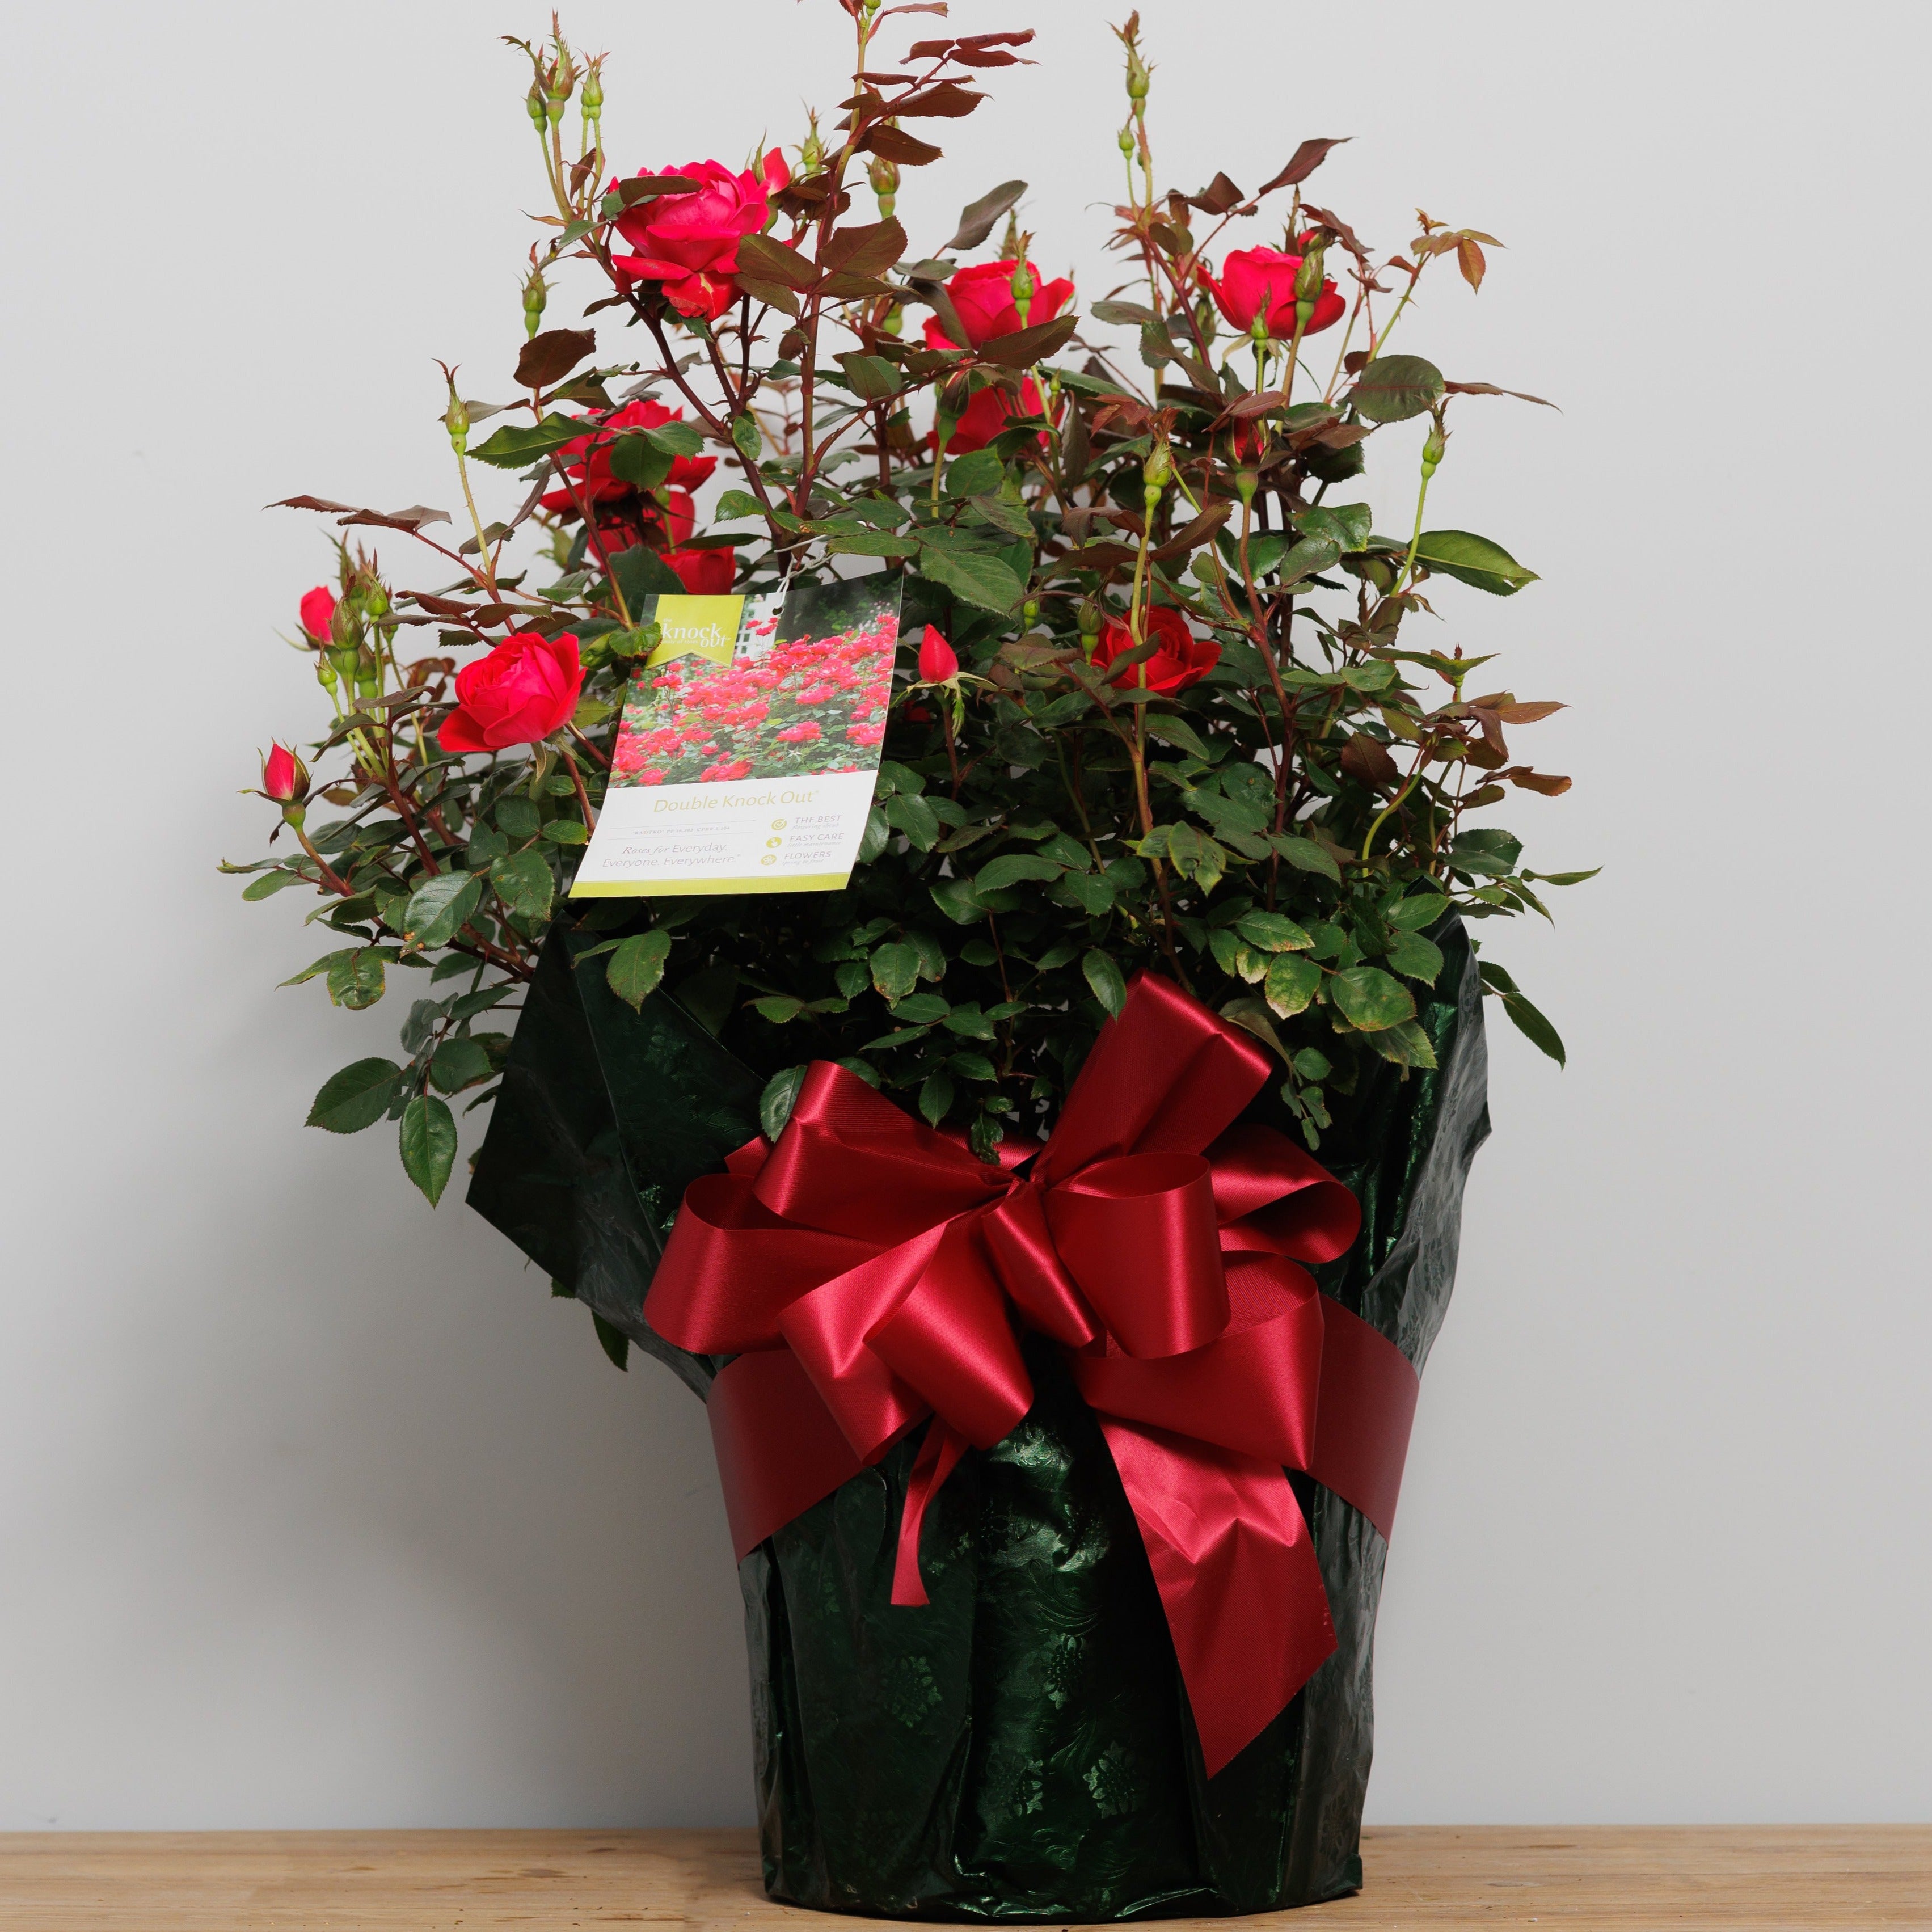 A knock out rose bush gift wrapped.